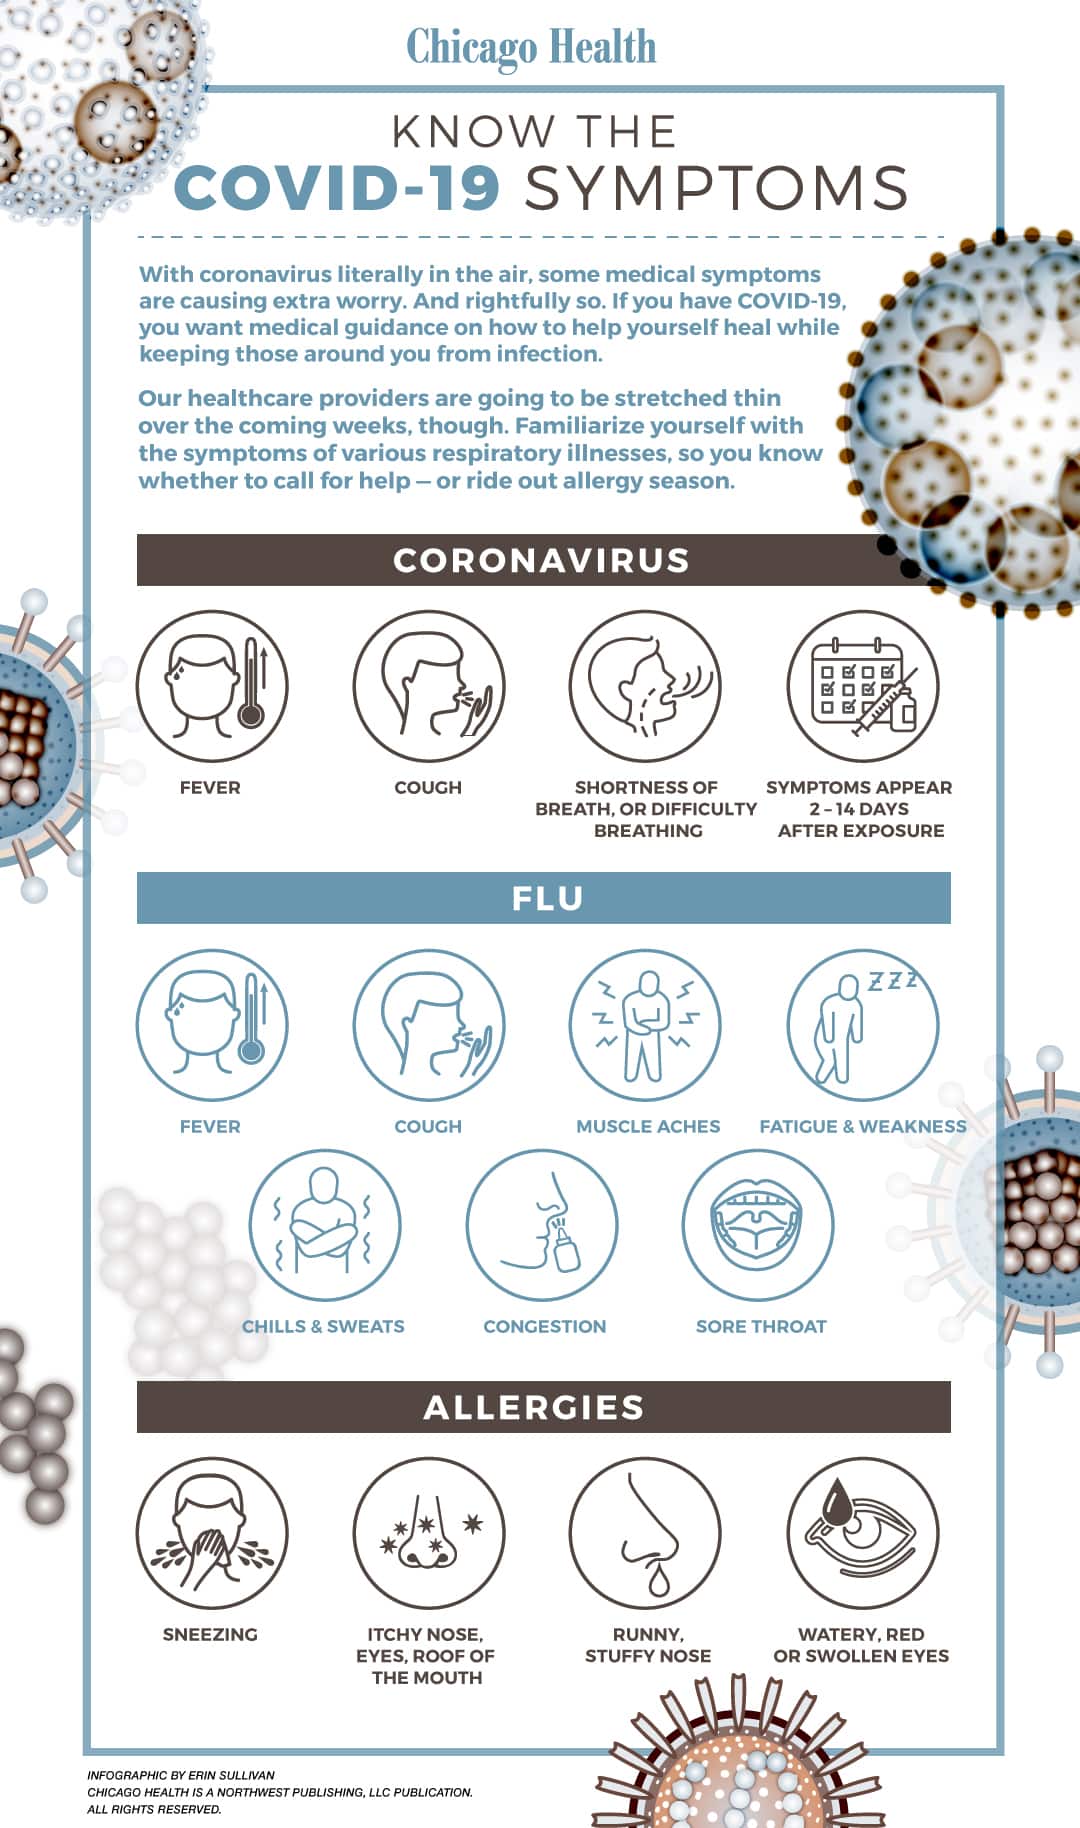 Know the Covid-19 symptoms infographic